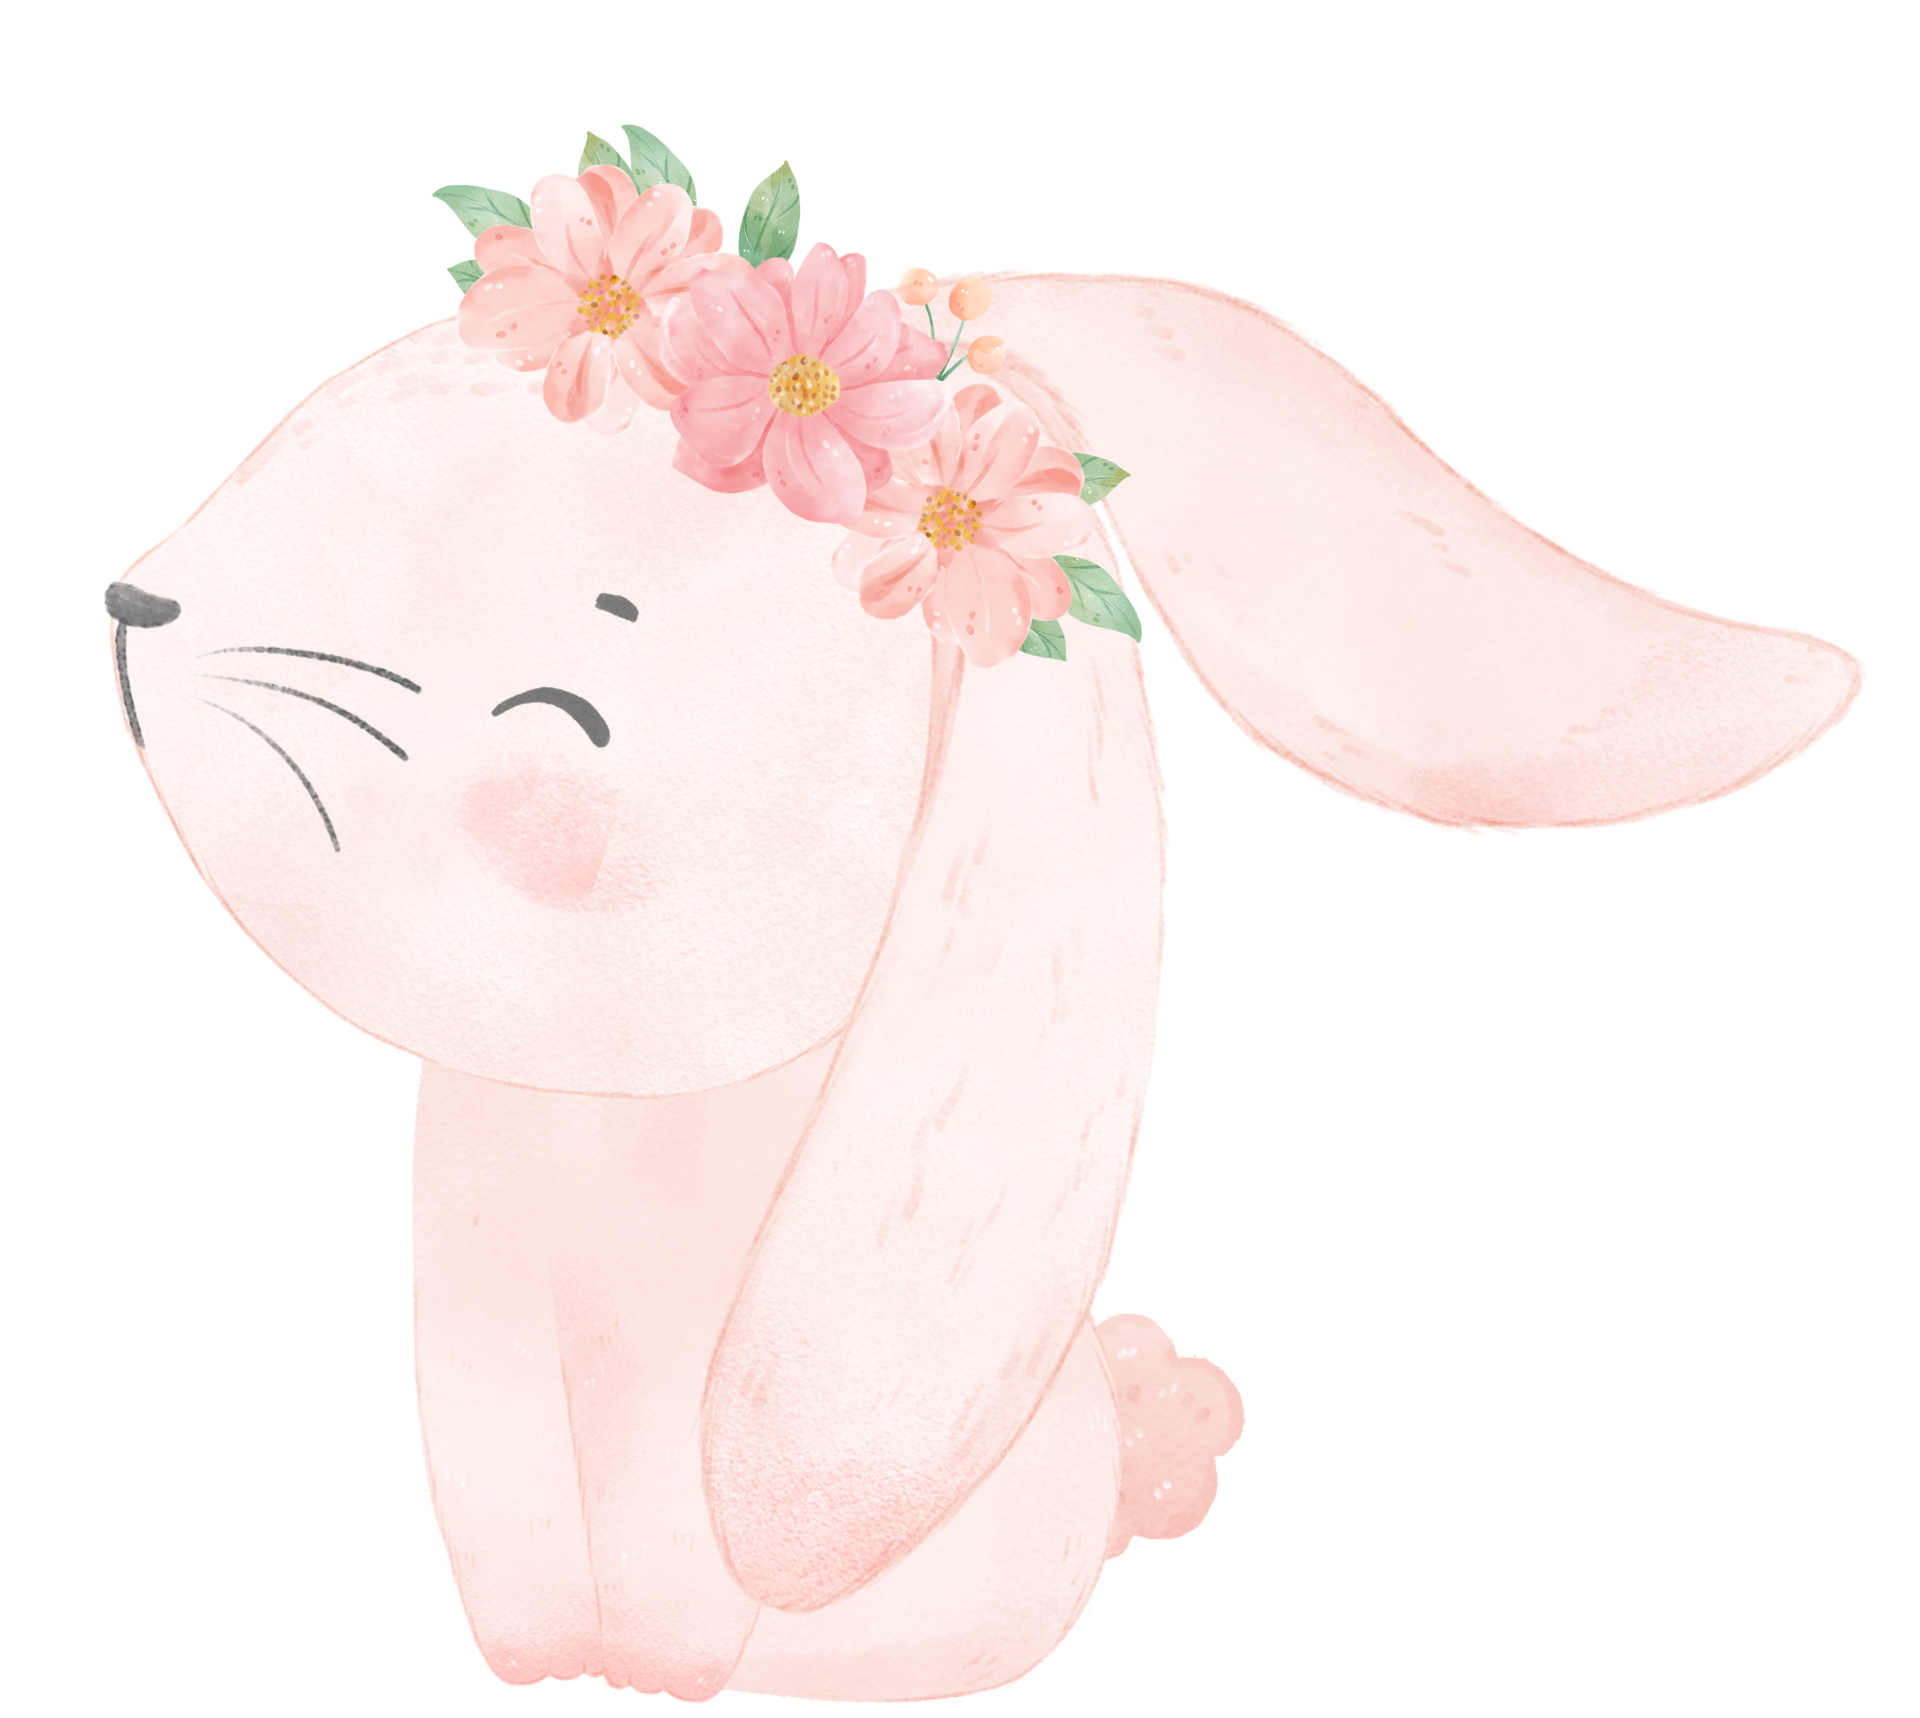 cute sweet princess baby pink bunny rabbit with floral crown watercolor ...